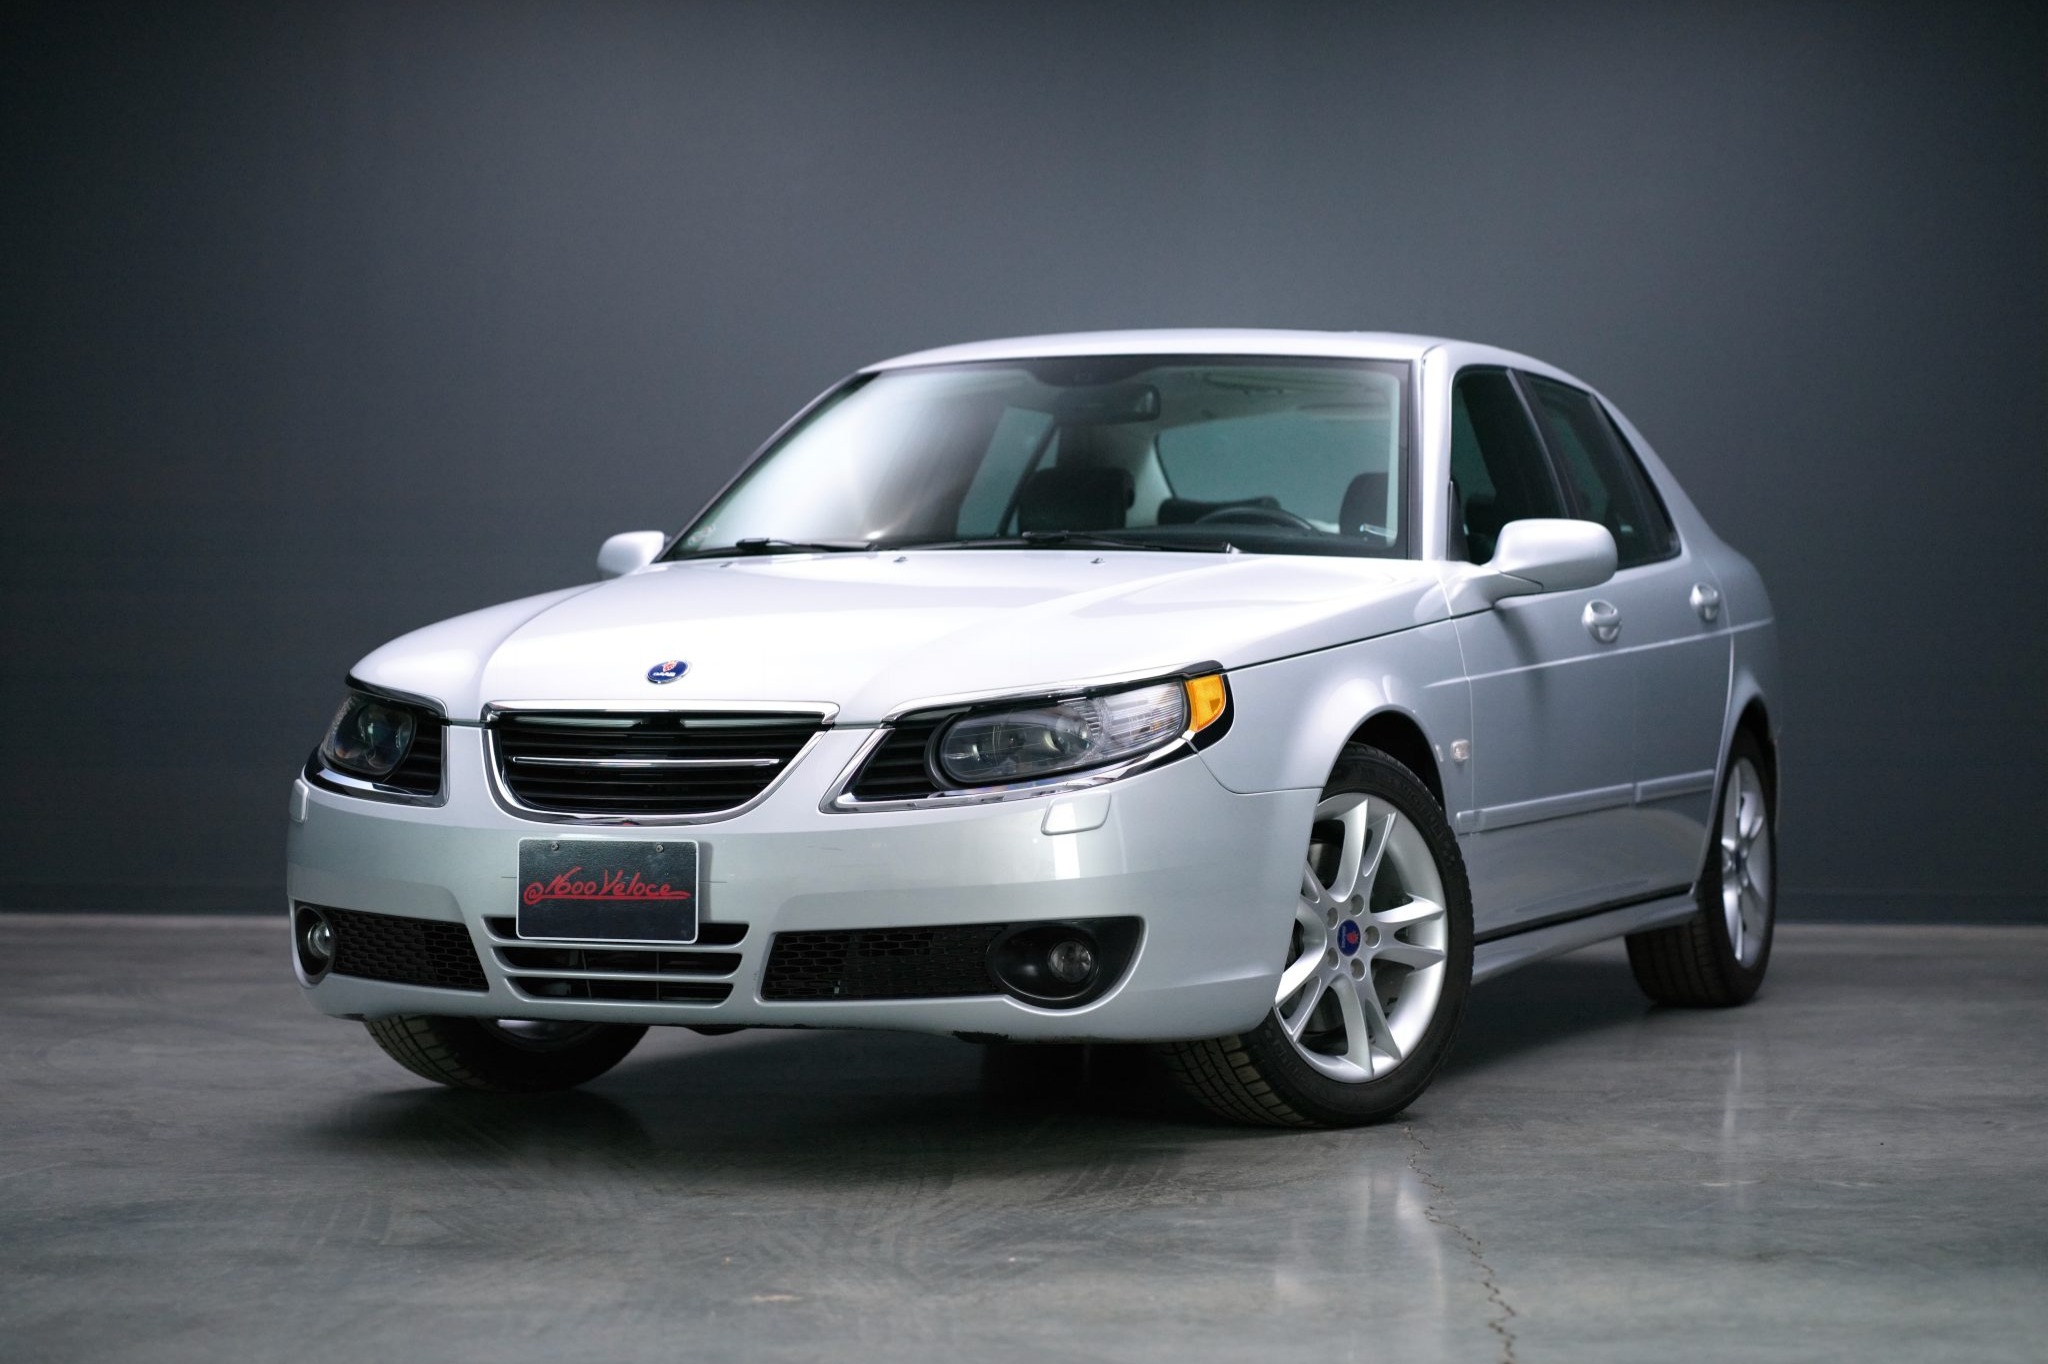 No Reserve: 2009 Saab 9-5 2.3T for sale on BaT Auctions - sold for $12,745  on April 29, 2022 (Lot #71,898) | Bring a Trailer